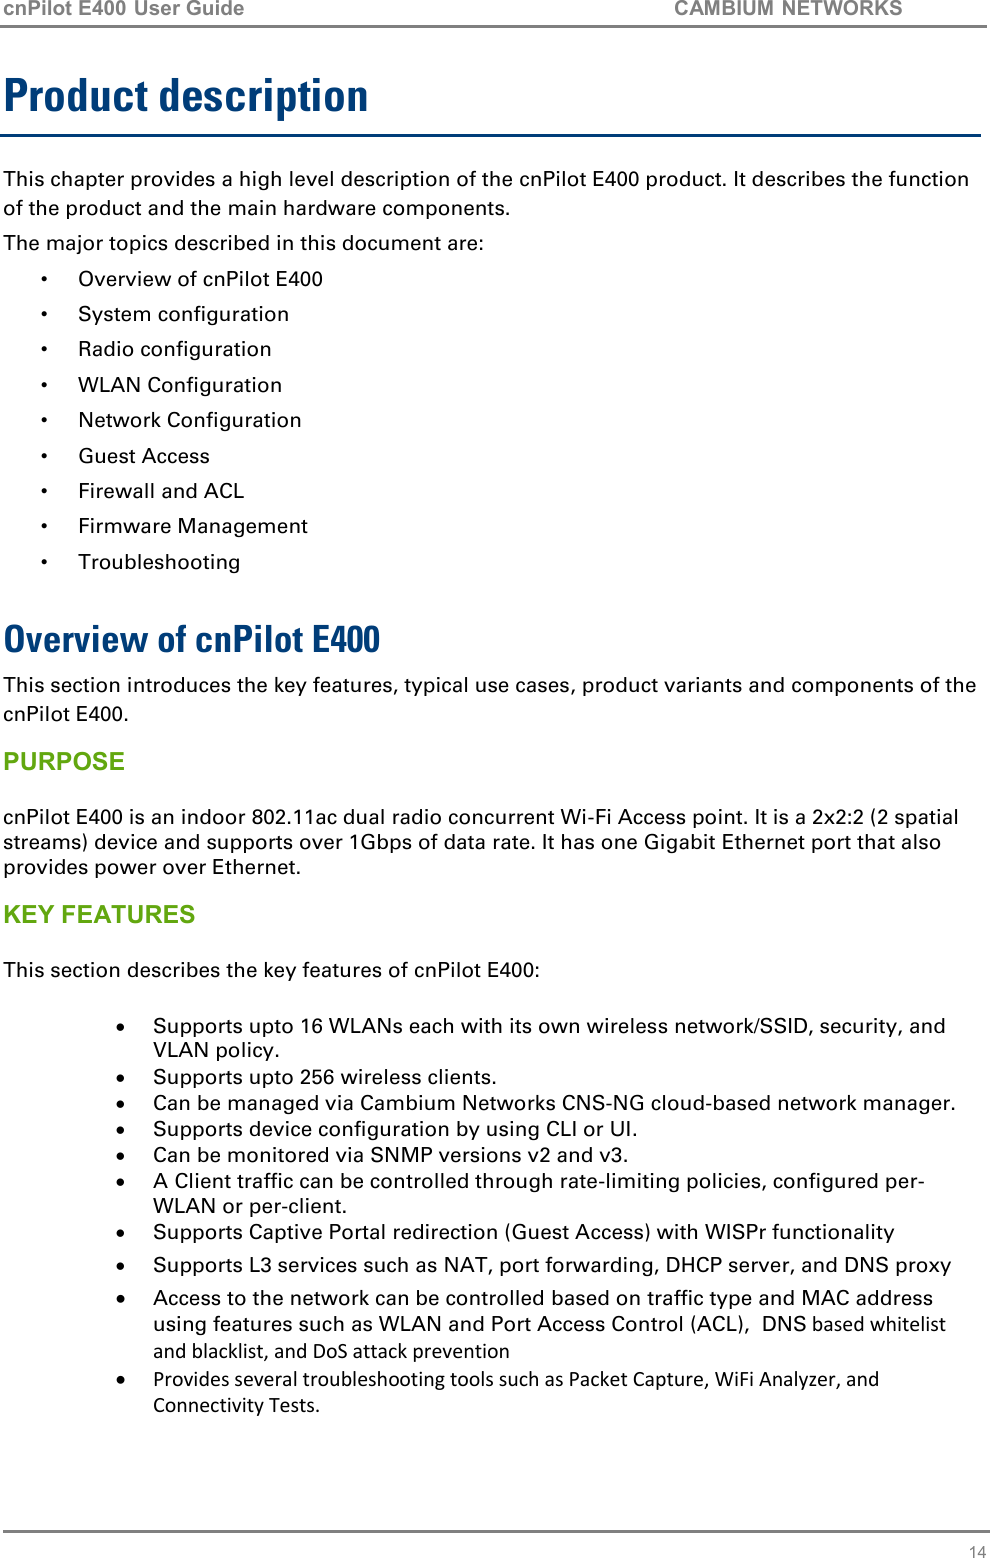 cnPilot E400 User Guide           CAMBIUM NETWORKS   14 Product description This chapter provides a high level description of the cnPilot E400 product. It describes the function of the product and the main hardware components. The major topics described in this document are: •  Overview of cnPilot E400 •  System configuration •  Radio configuration •  WLAN Configuration •  Network Configuration •  Guest Access •  Firewall and ACL •  Firmware Management •  Troubleshooting  Overview of cnPilot E400 This section introduces the key features, typical use cases, product variants and components of the cnPilot E400. PURPOSE  cnPilot E400 is an indoor 802.11ac dual radio concurrent Wi-Fi Access point. It is a 2x2:2 (2 spatial streams) device and supports over 1Gbps of data rate. It has one Gigabit Ethernet port that also provides power over Ethernet. KEY FEATURES  This section describes the key features of cnPilot E400:  Supports upto 16 WLANs each with its own wireless network/SSID, security, and VLAN policy.  Supports upto 256 wireless clients.  Can be managed via Cambium Networks CNS-NG cloud-based network manager.  Supports device configuration by using CLI or UI.  Can be monitored via SNMP versions v2 and v3.  A Client traffic can be controlled through rate-limiting policies, configured per-WLAN or per-client.  Supports Captive Portal redirection (Guest Access) with WISPr functionality  Supports L3 services such as NAT, port forwarding, DHCP server, and DNS proxy  Access to the network can be controlled based on traffic type and MAC address using features such as WLAN and Port Access Control (ACL),  DNS based whitelist and blacklist, and DoS attack prevention  Provides several troubleshooting tools such as Packet Capture, WiFi Analyzer, and Connectivity Tests. 